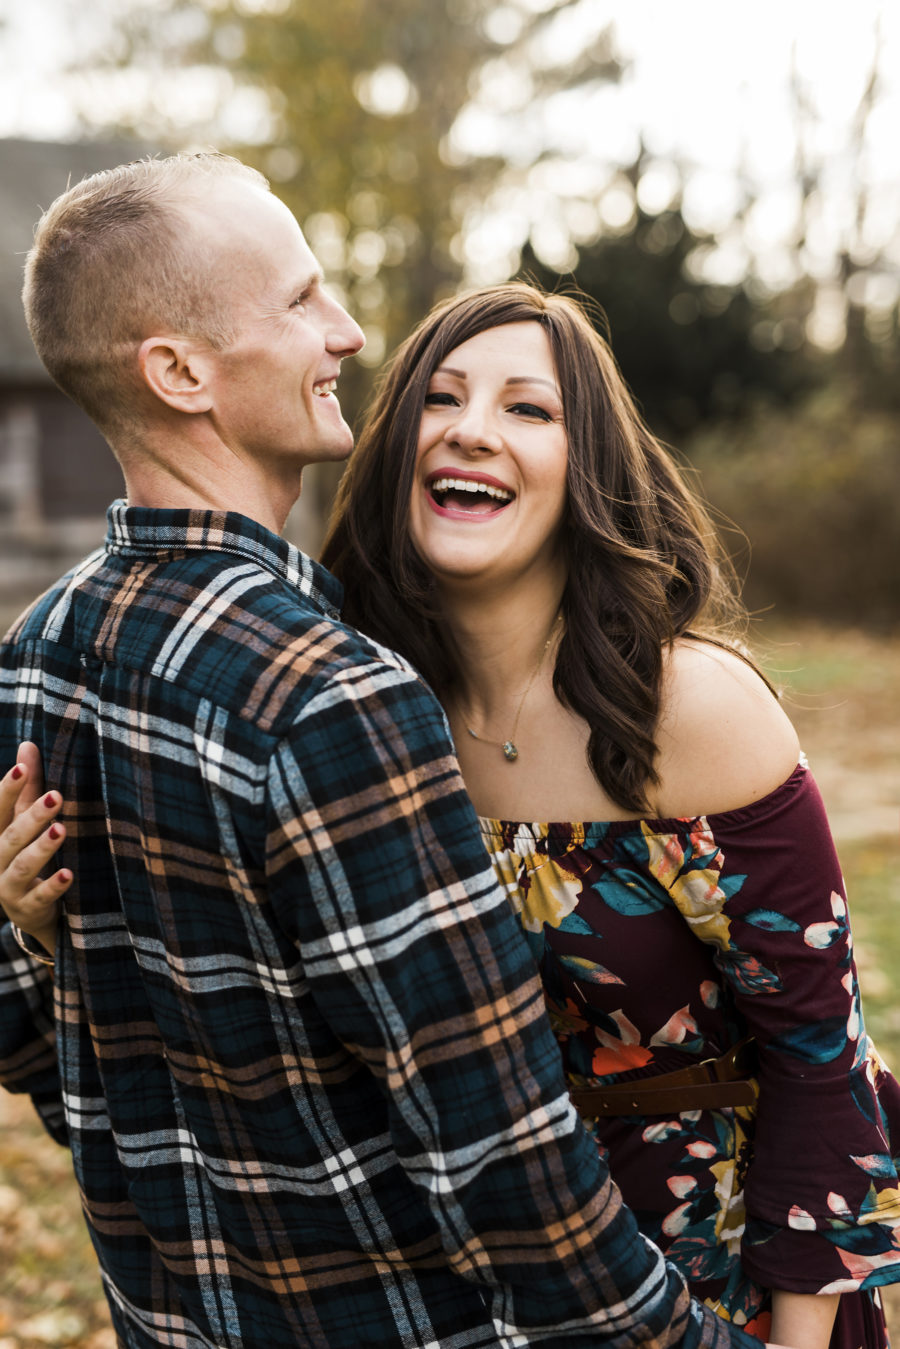 Bri and Tyler’s Engagement Session in Montauk, NY